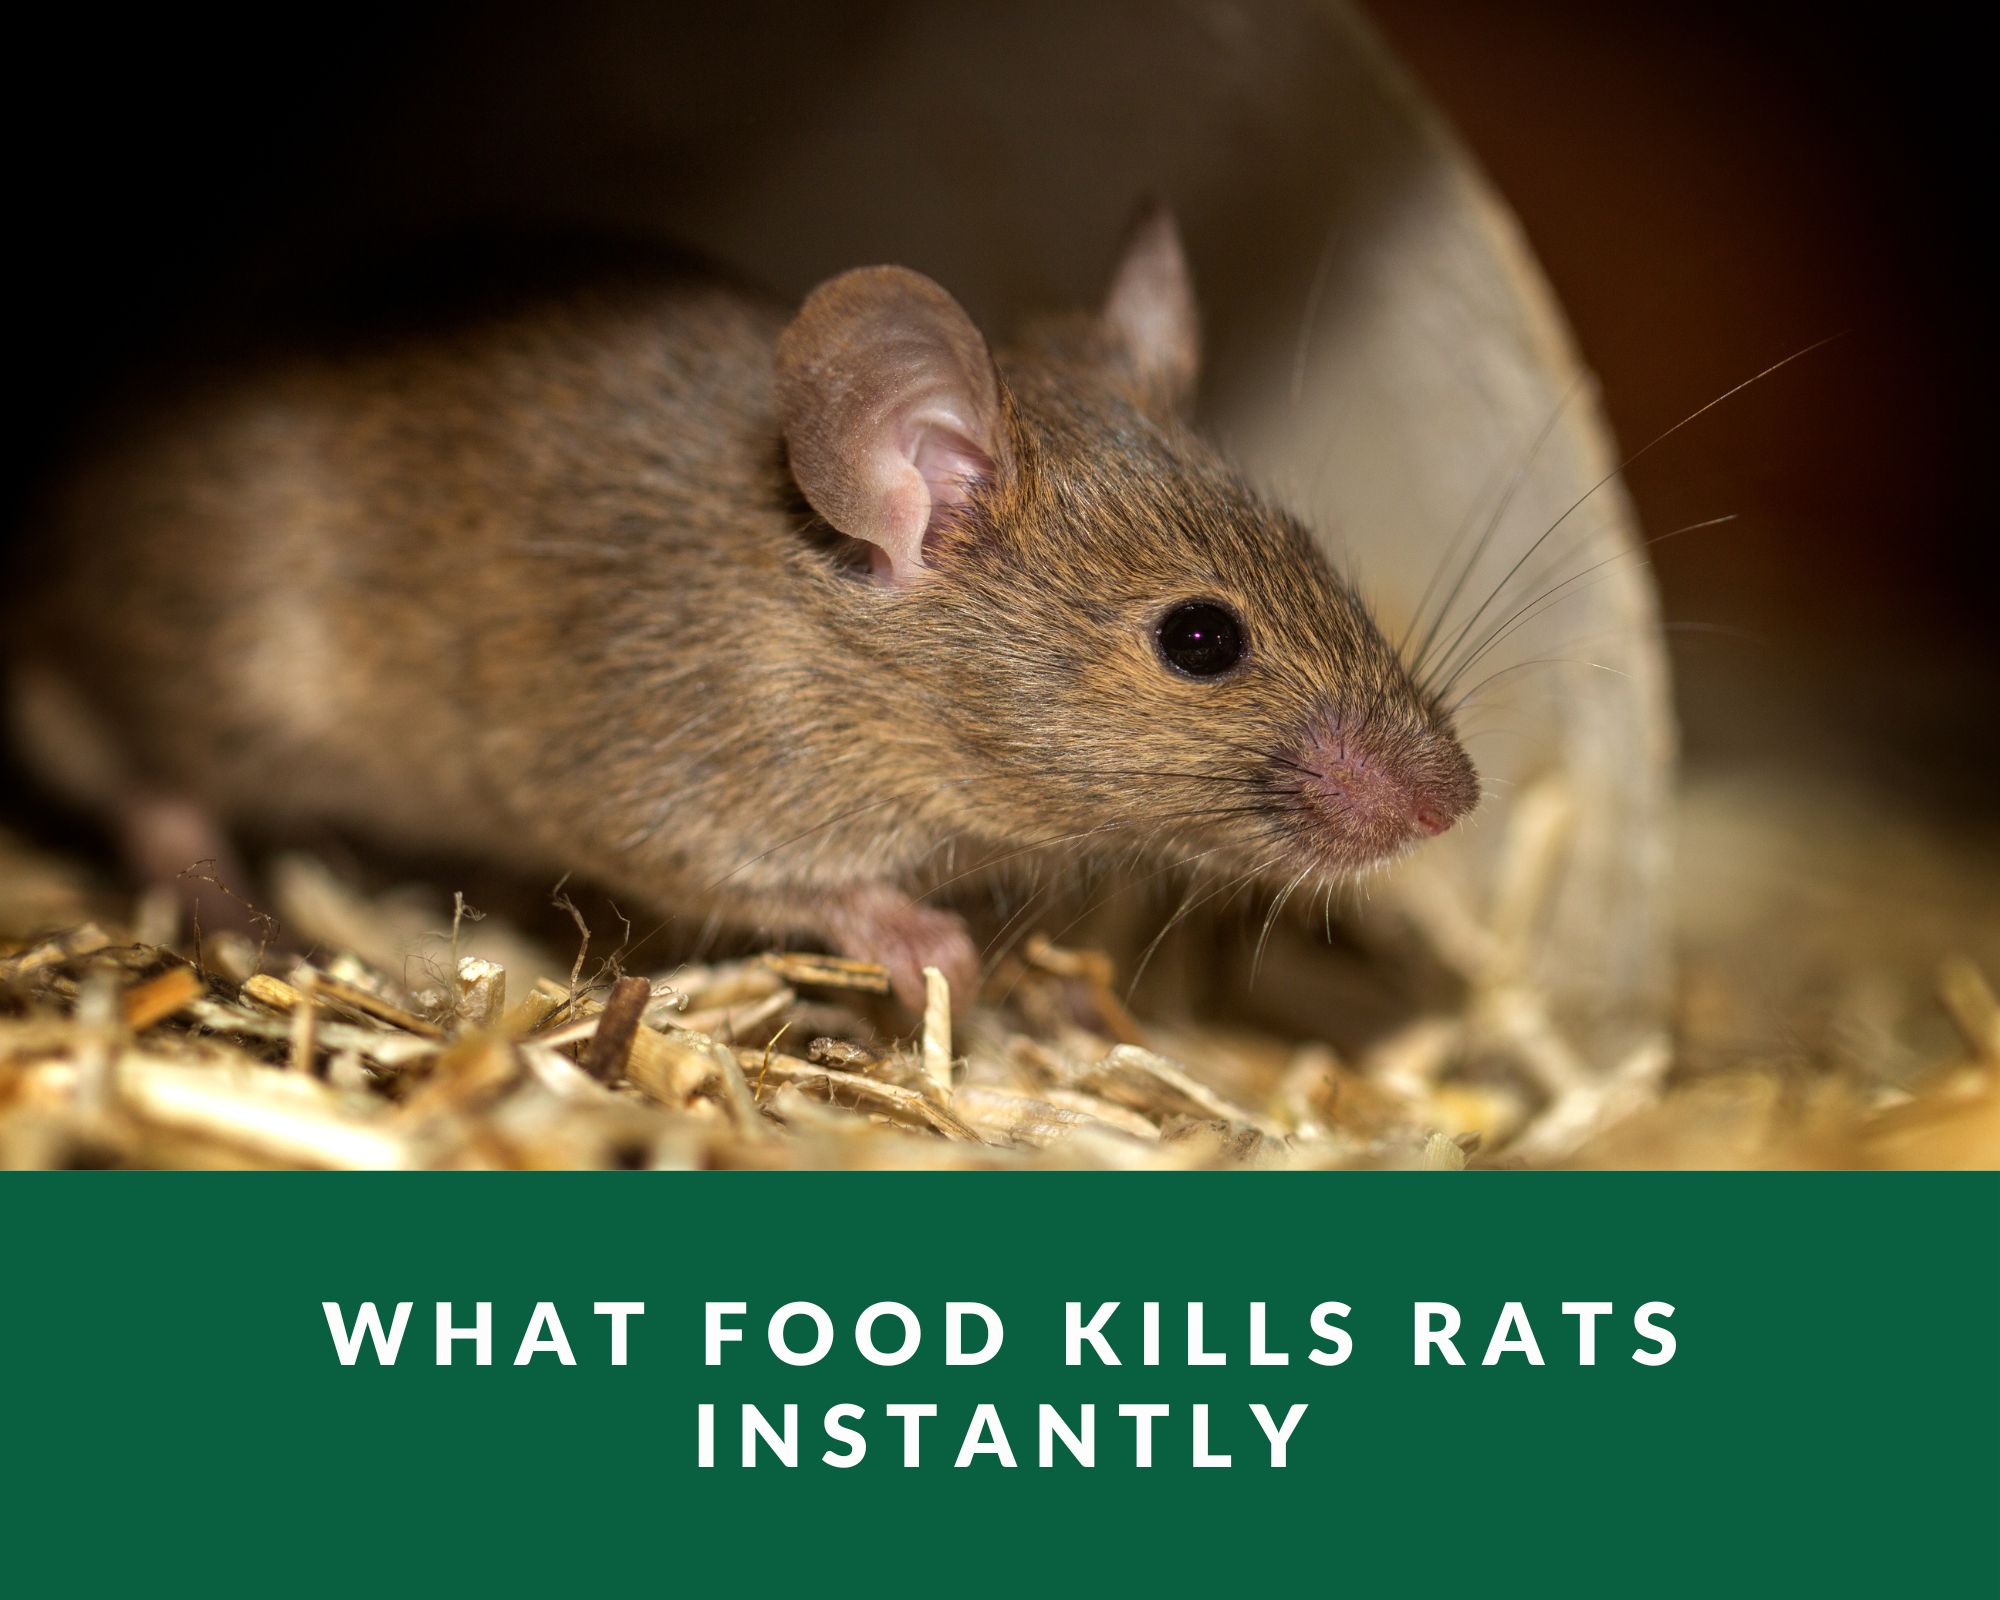 What food kills rats instantly